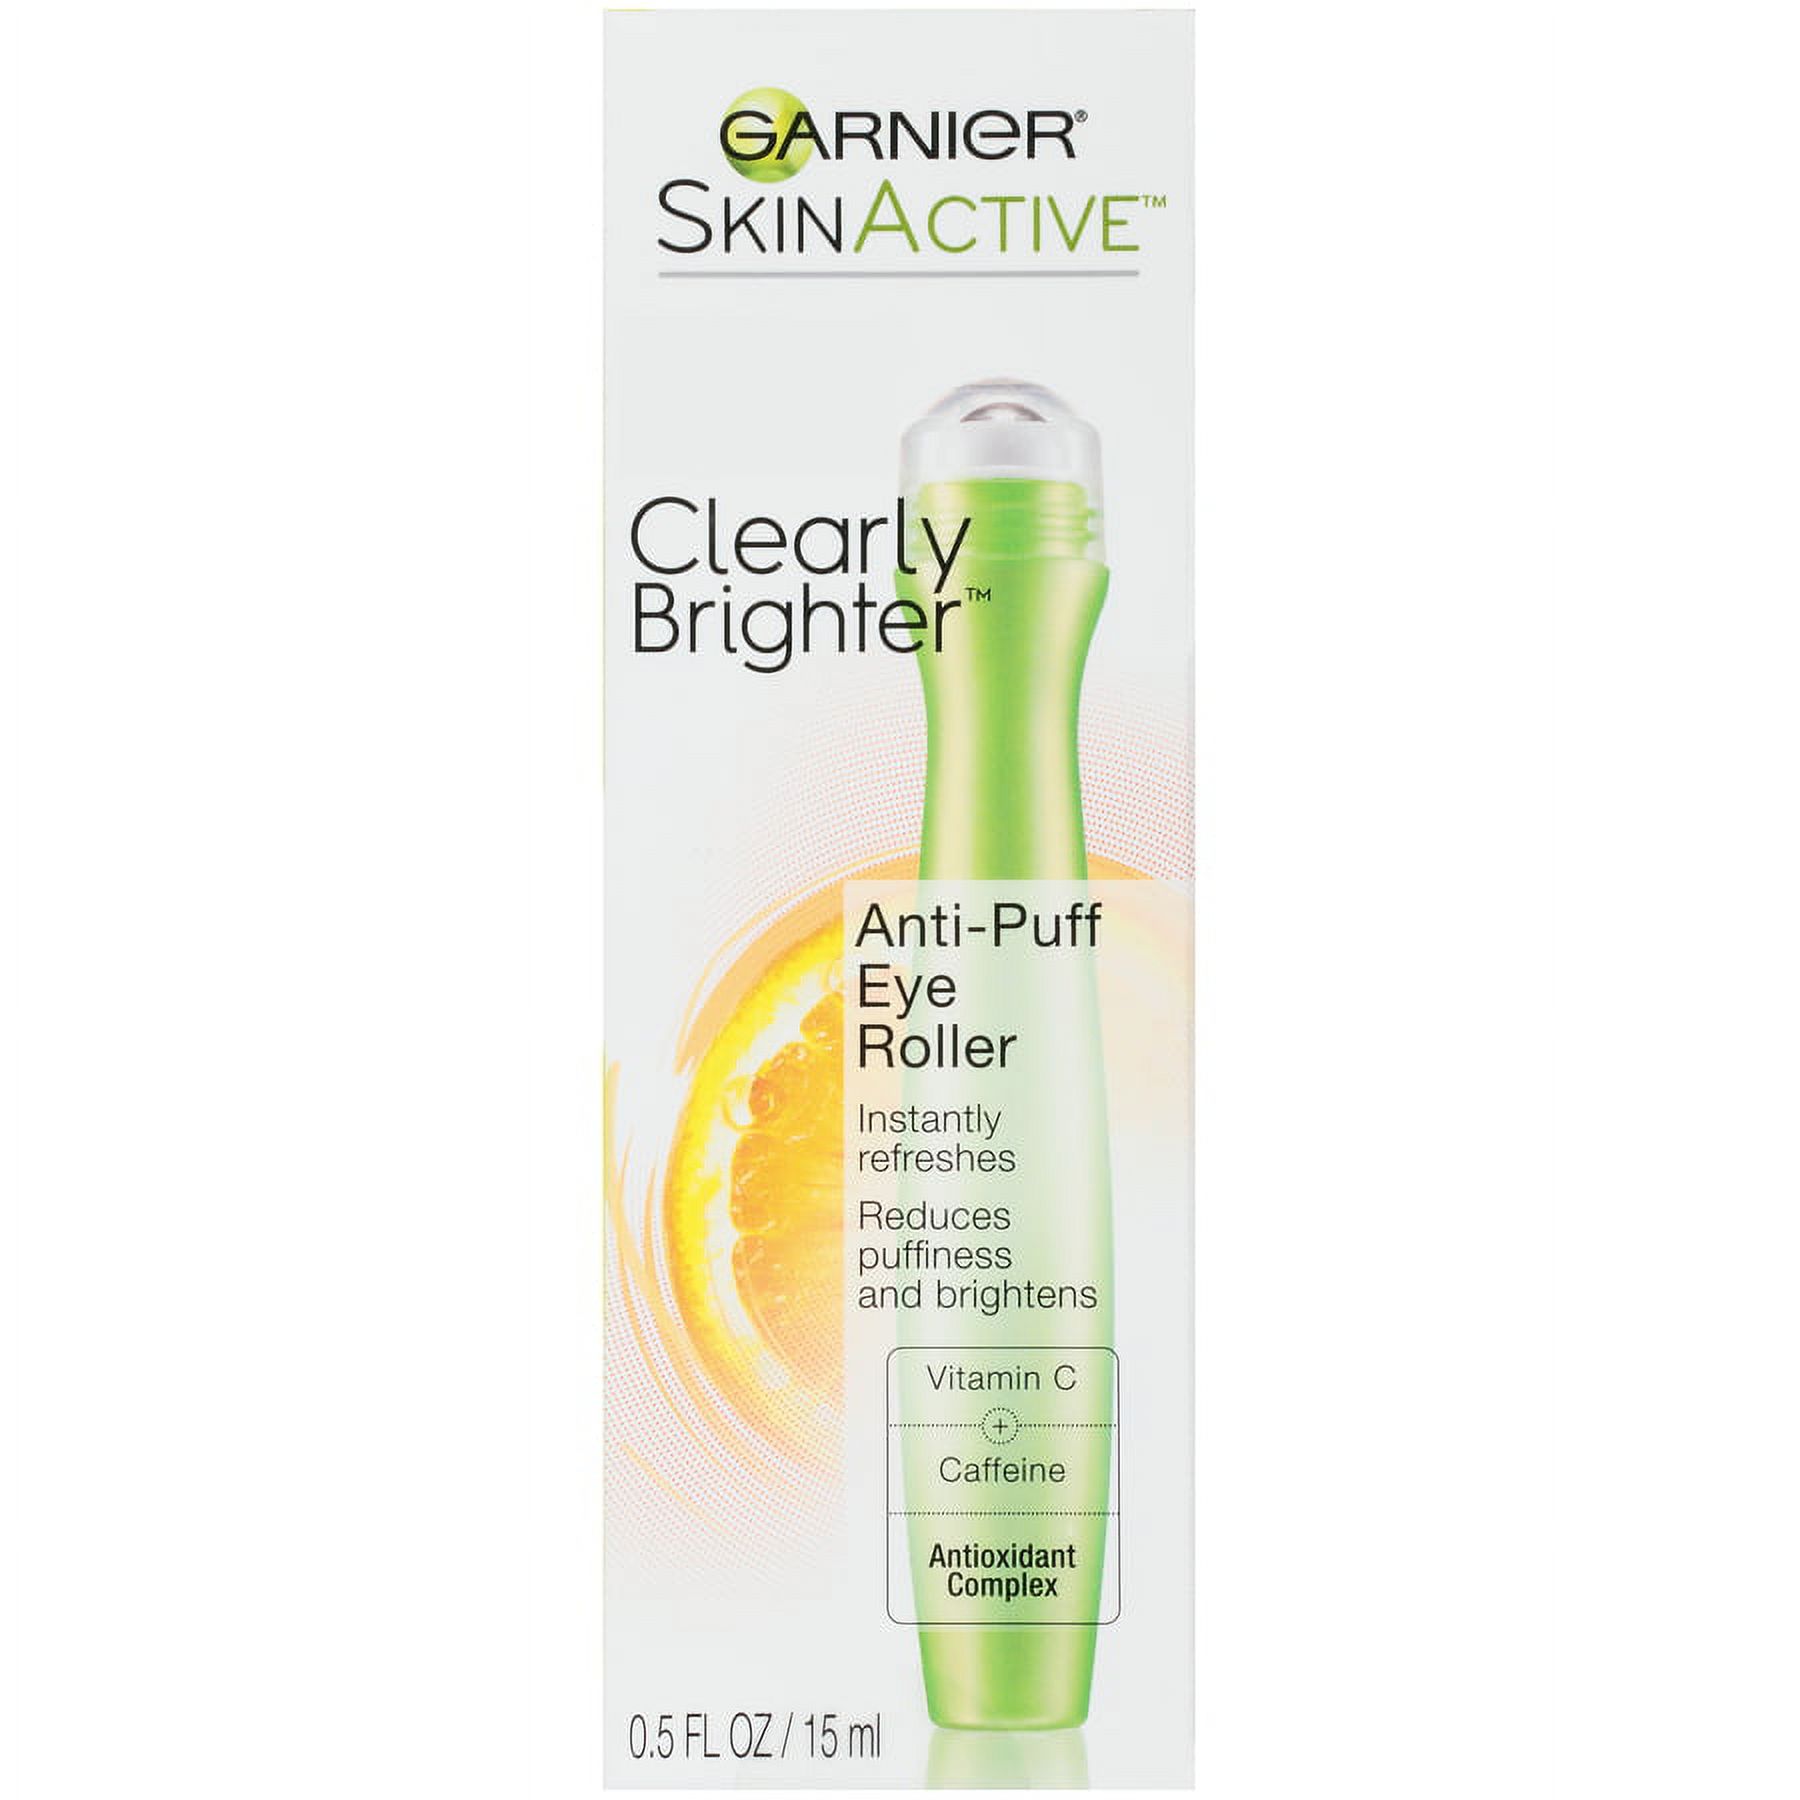 Garnier SkinActive Clearly Brighter Anti Puff Eye Roller, 0.5 fl oz - image 2 of 9